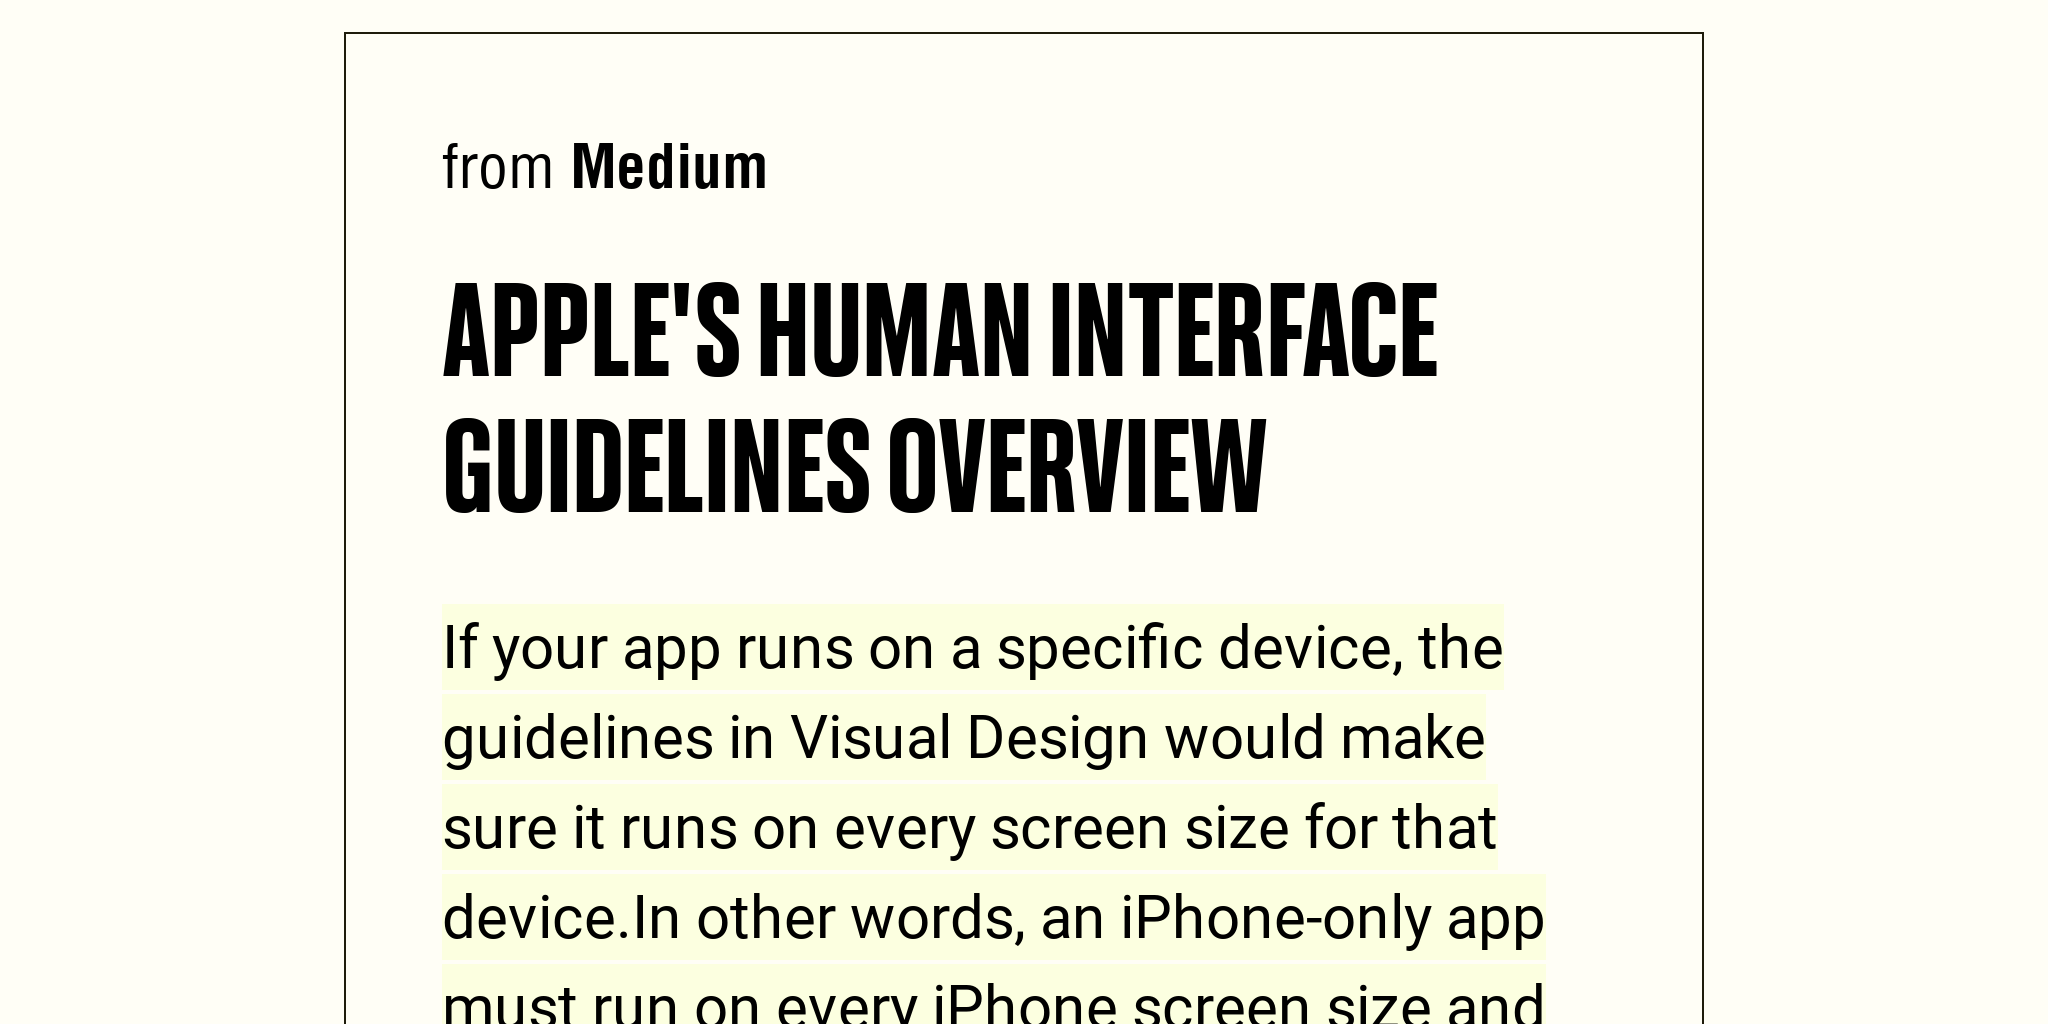 Apples Human Interface Guidelines Overview Briefly 5950